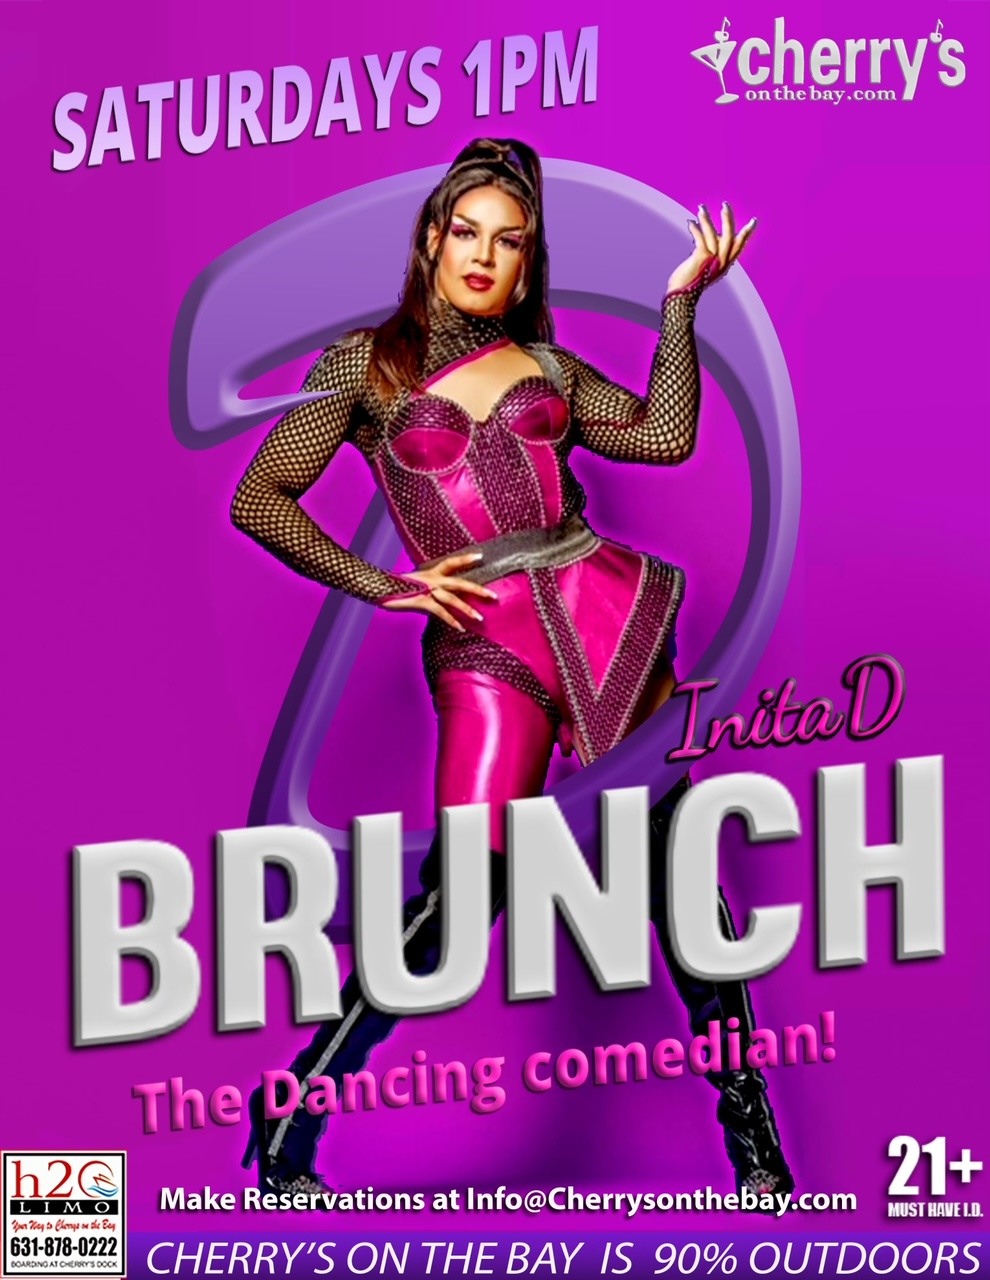 D-Brunch Saturday 1PM Cherry's on the Bay